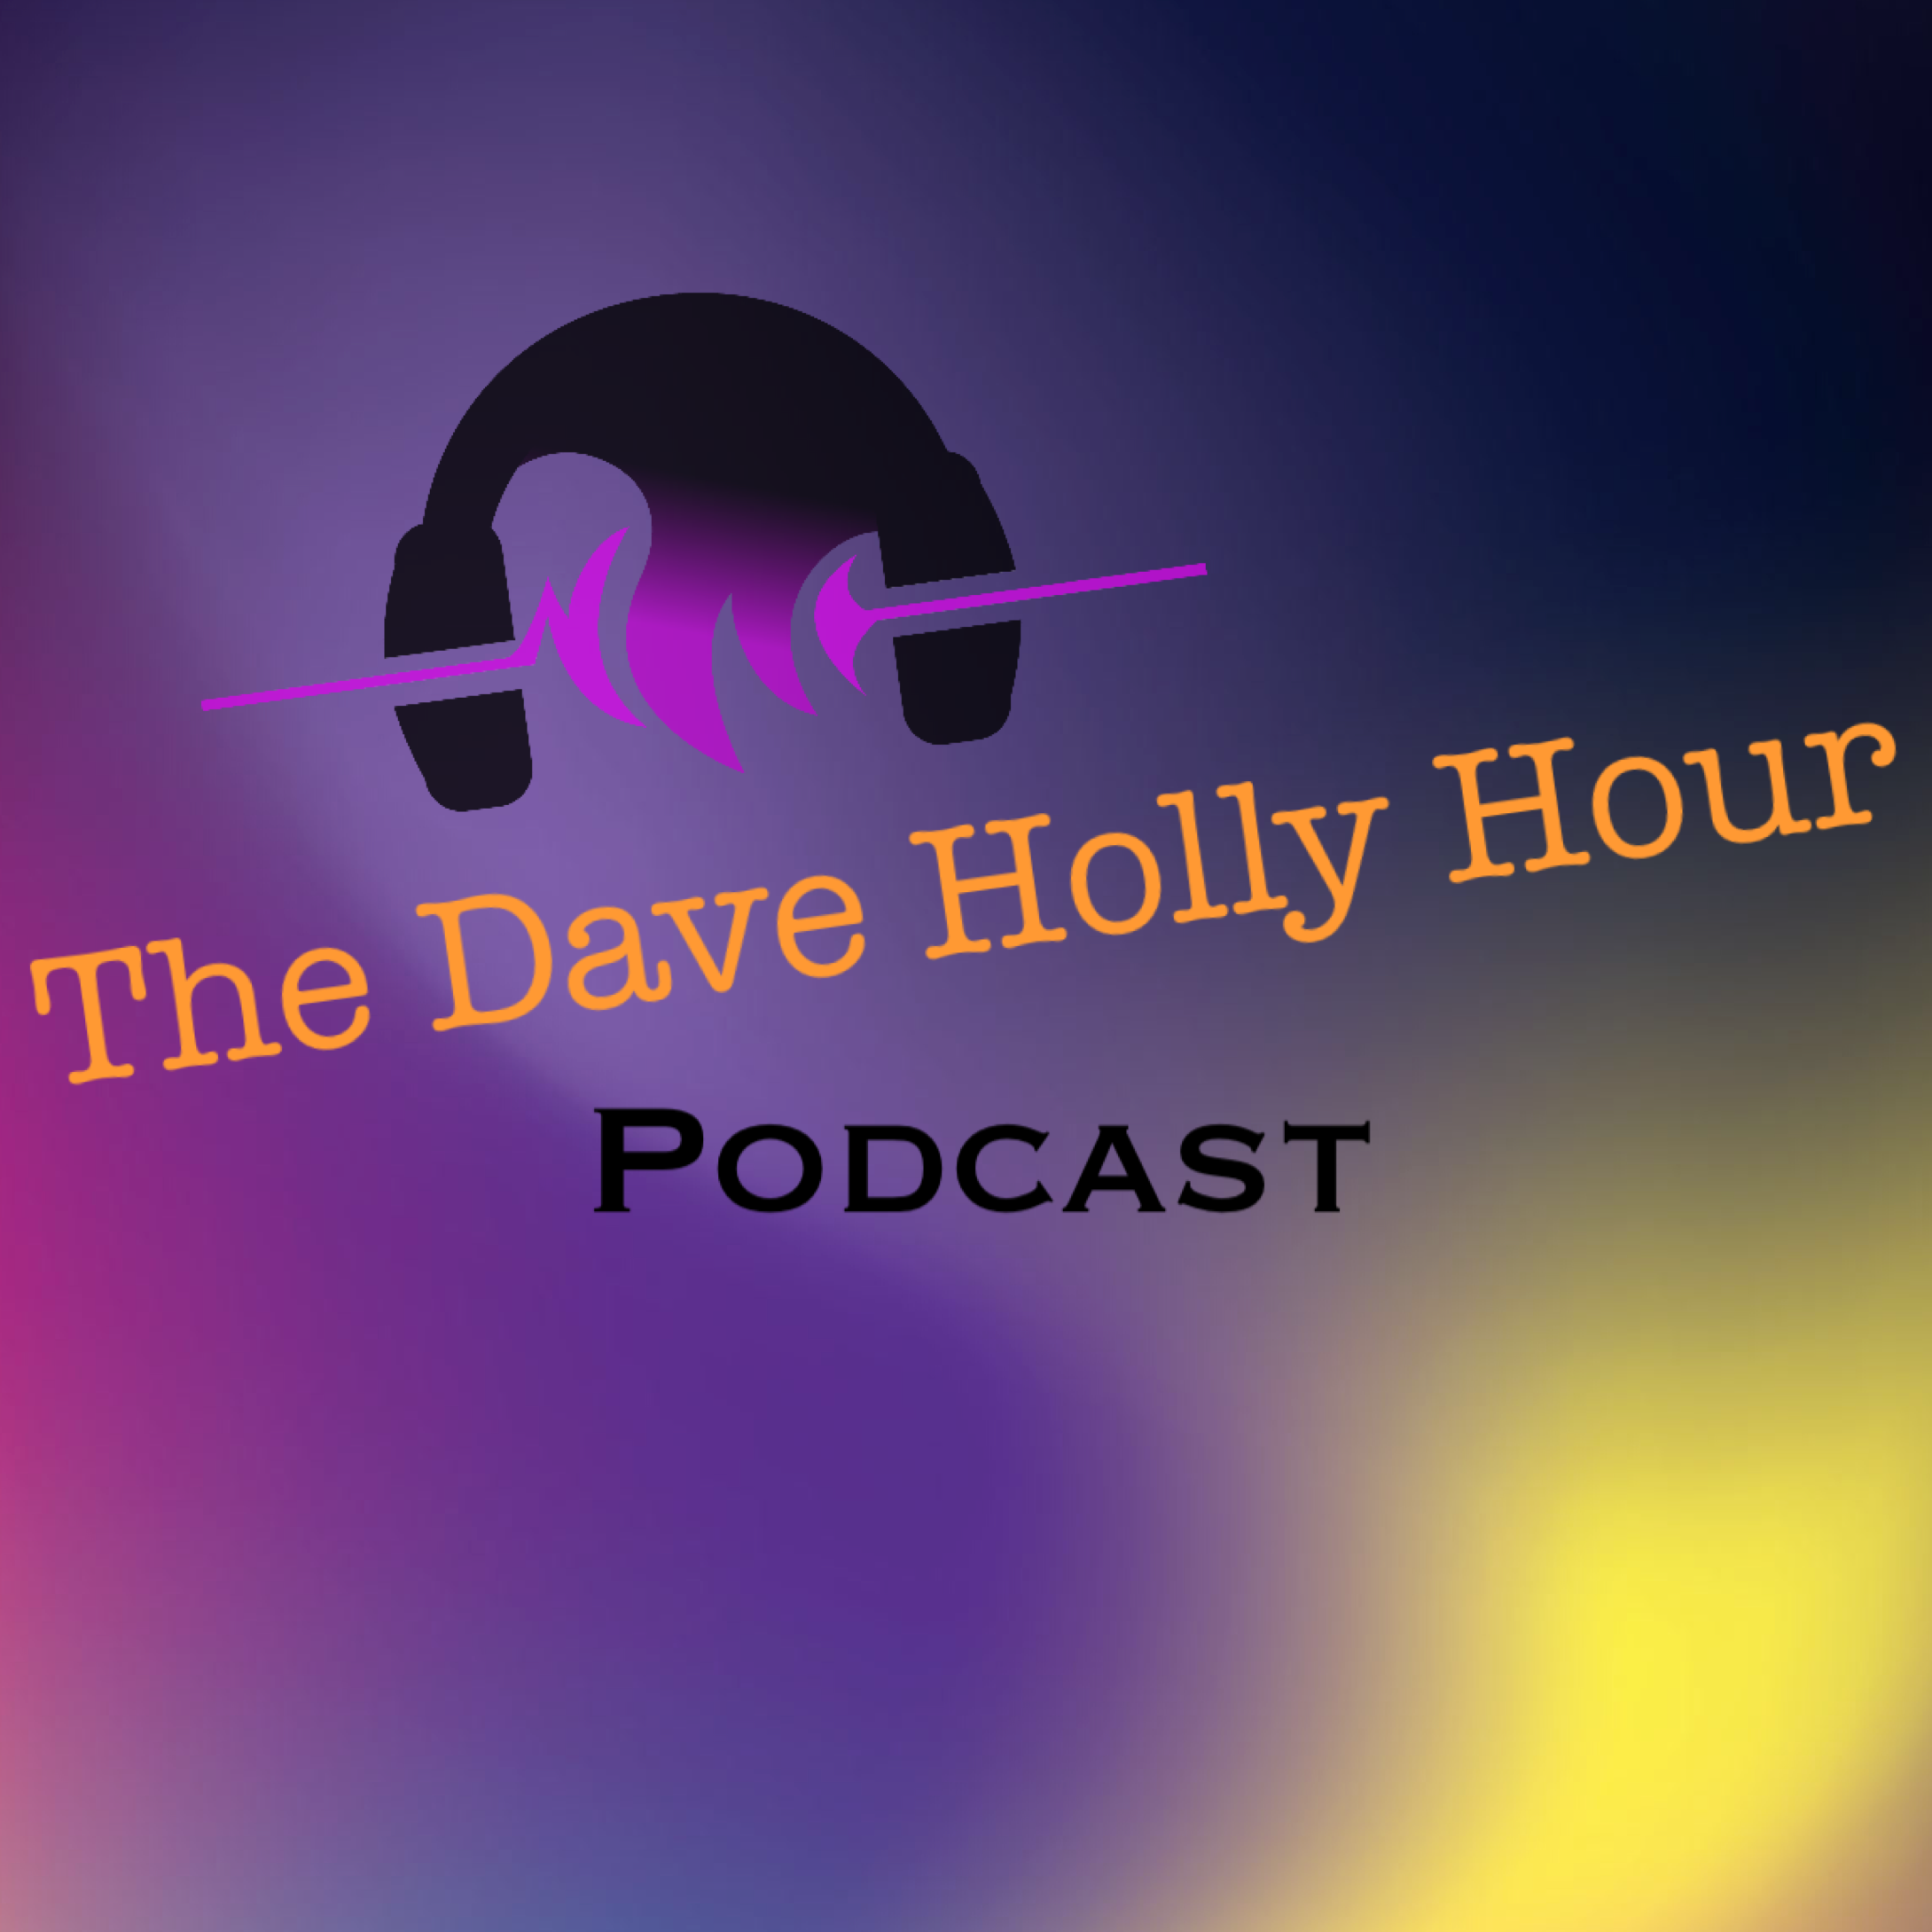 Dave Holly Hour Episode 21 February 27, 2020 Image